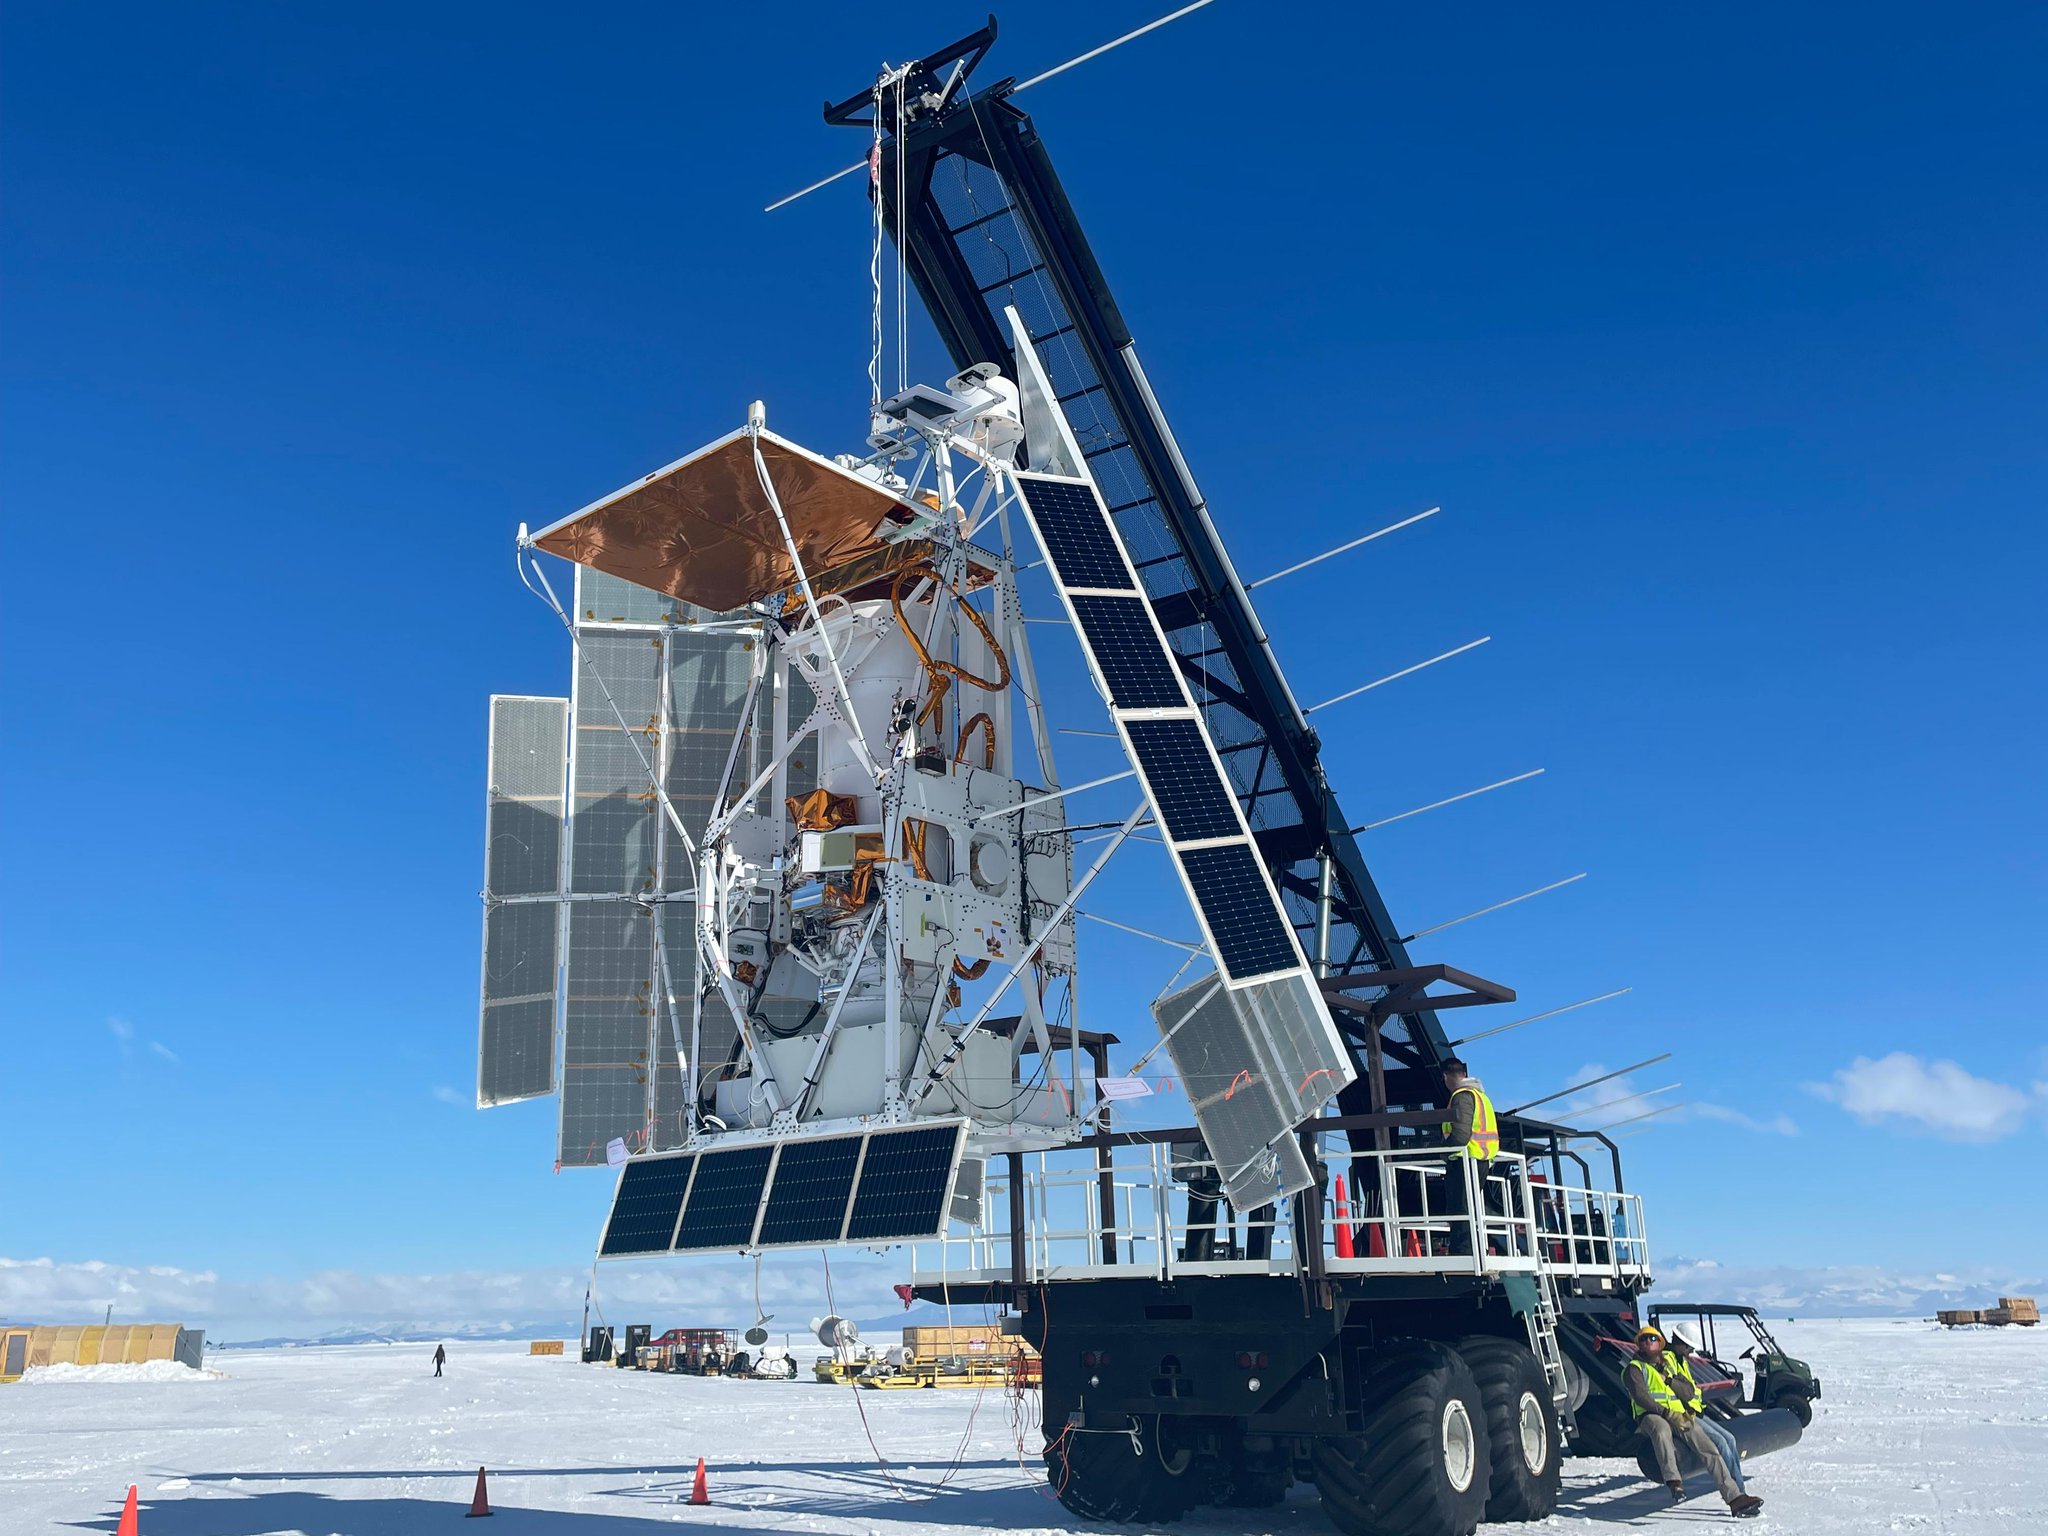 A crane holding the GUSTO gondola and telescope sits out on the ice of Antarctica